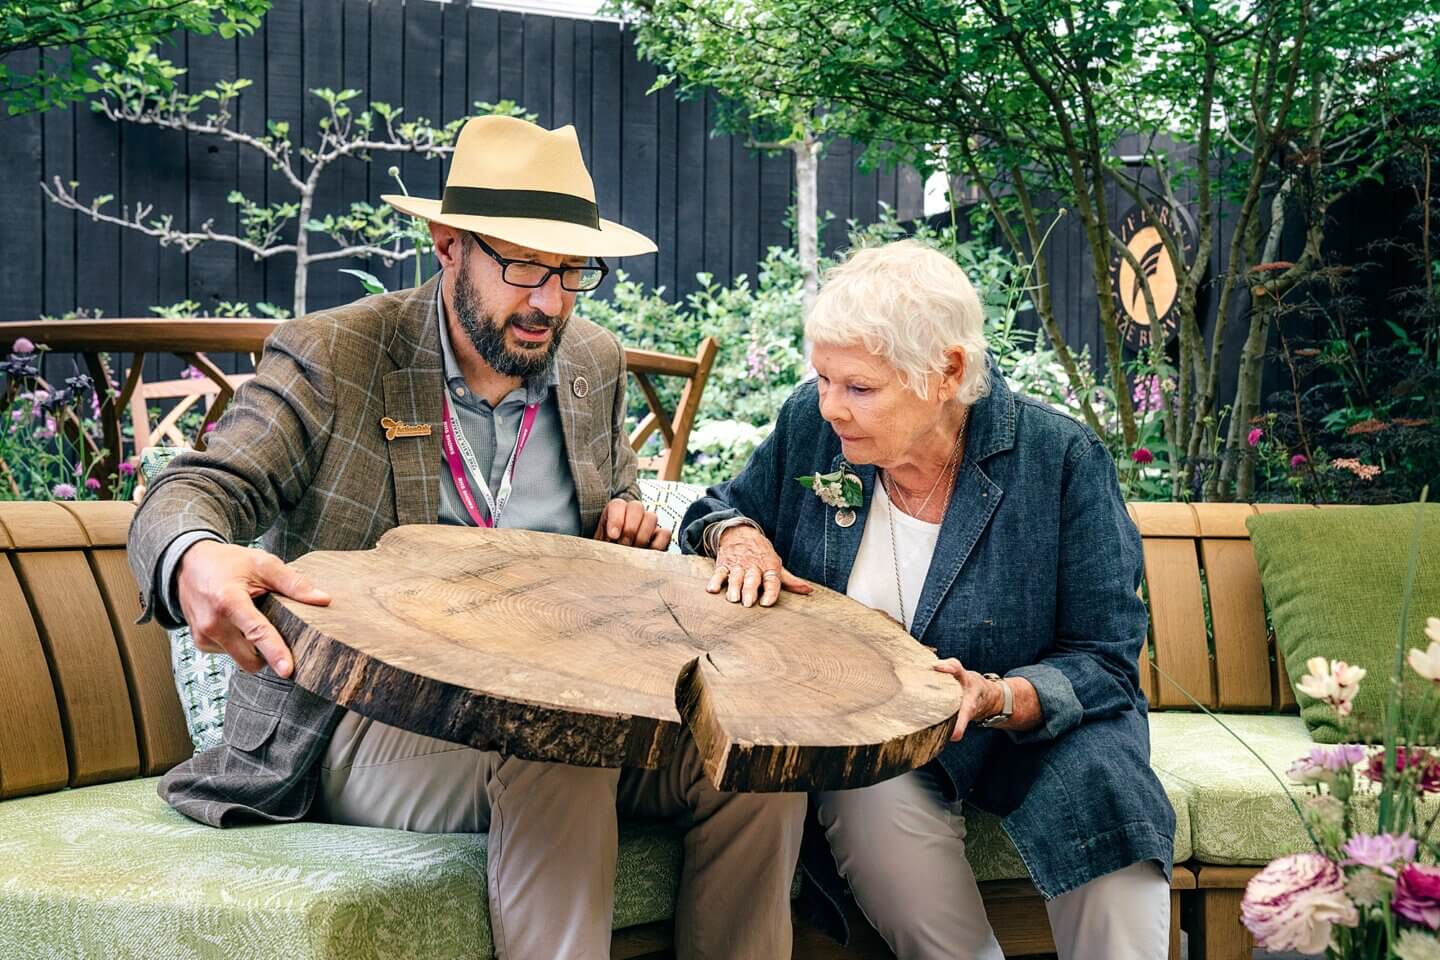 examining the dates engraved in oak for Dame Judi Dench